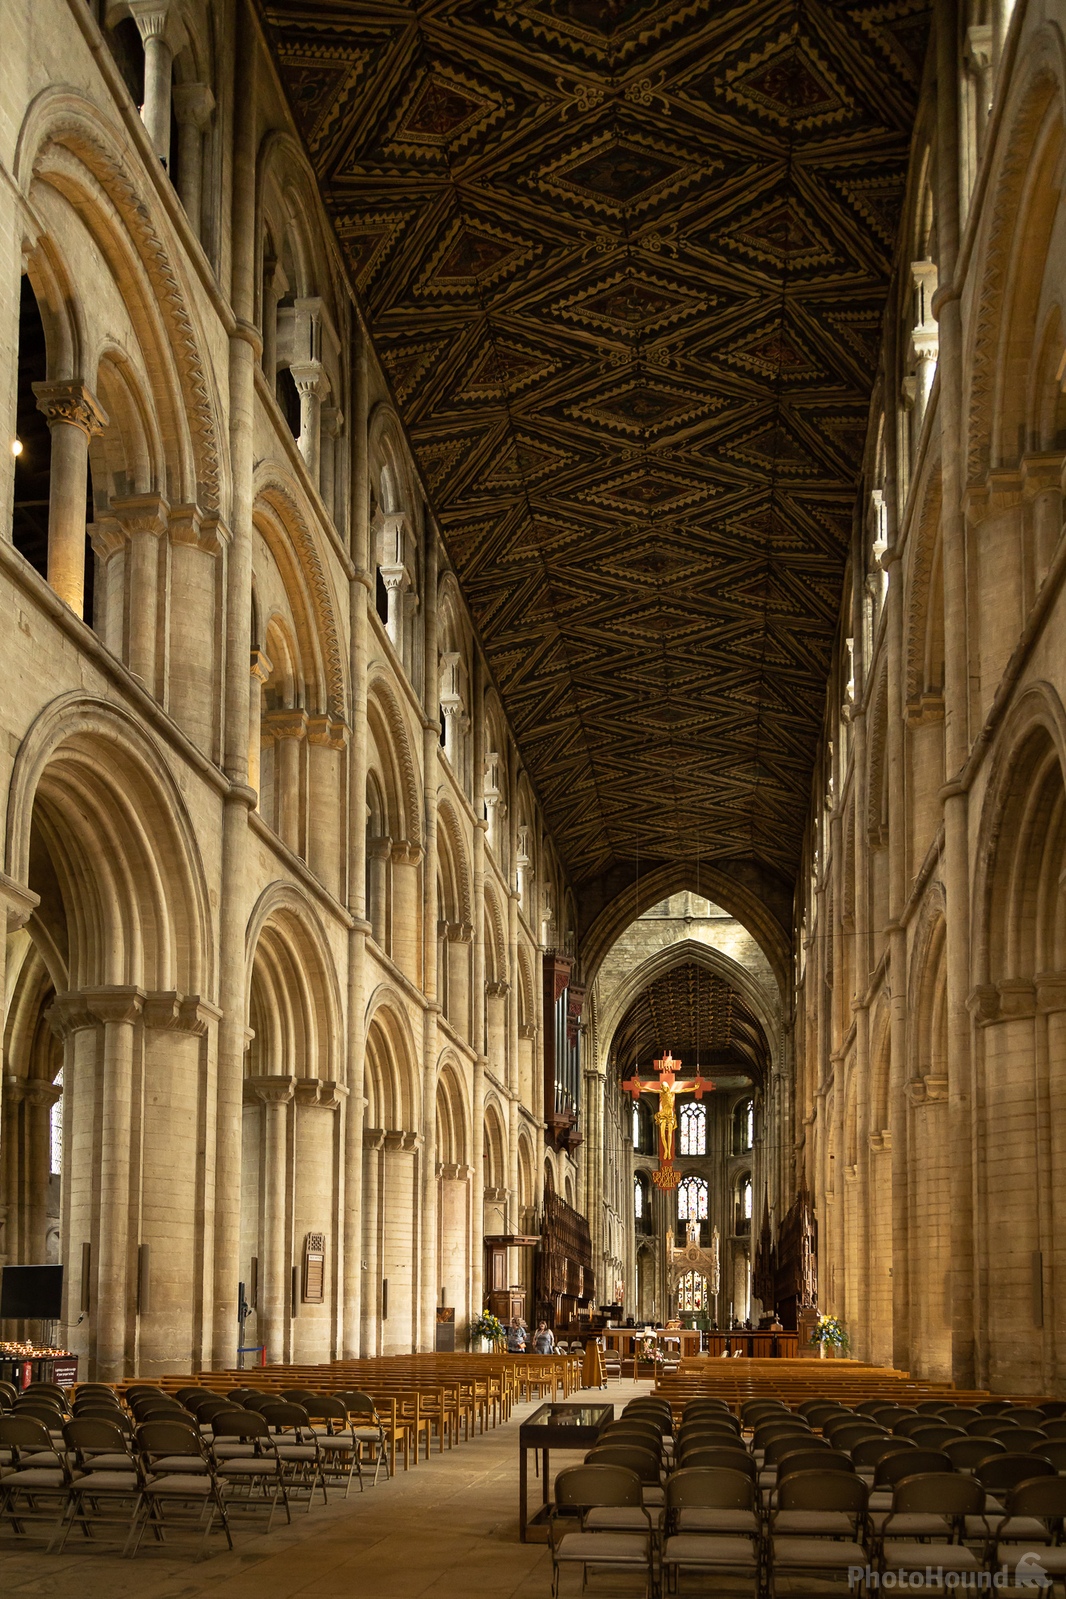 Image of Peterborough Cathedral by Carol Henson